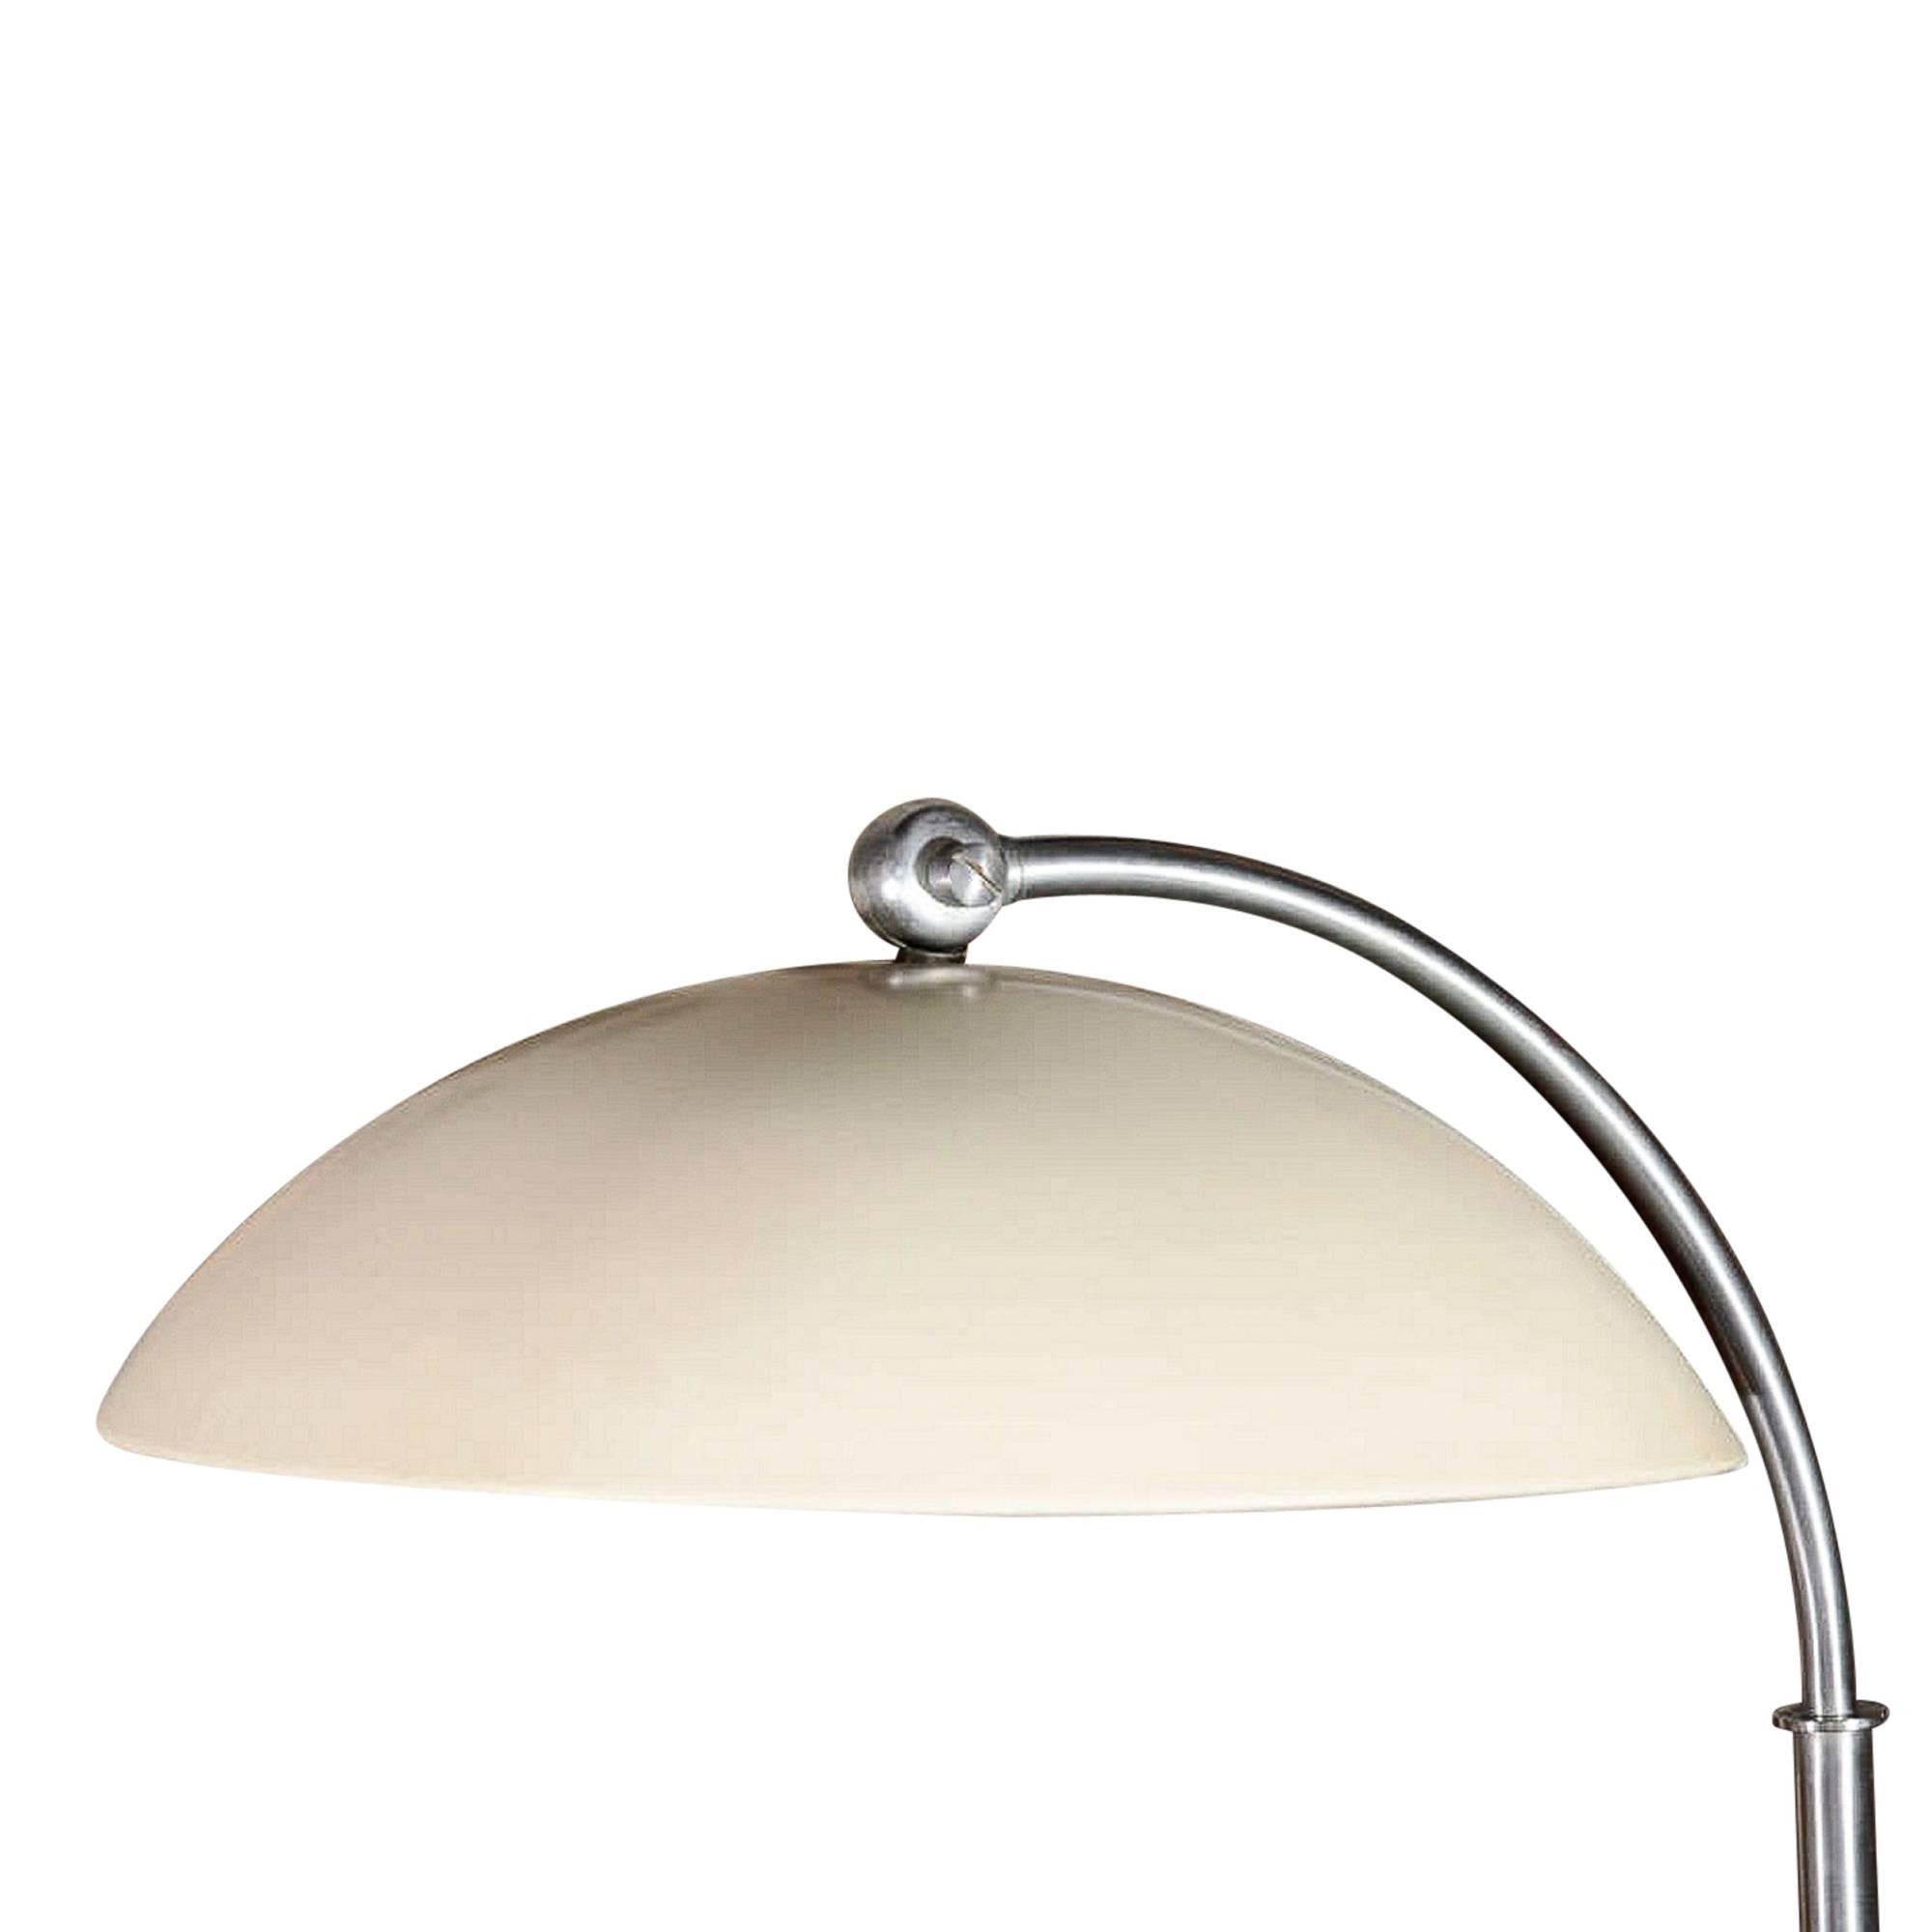 Mid-20th Century Rare Standing Lamp by Walter Von Nessen, American, 1940s For Sale